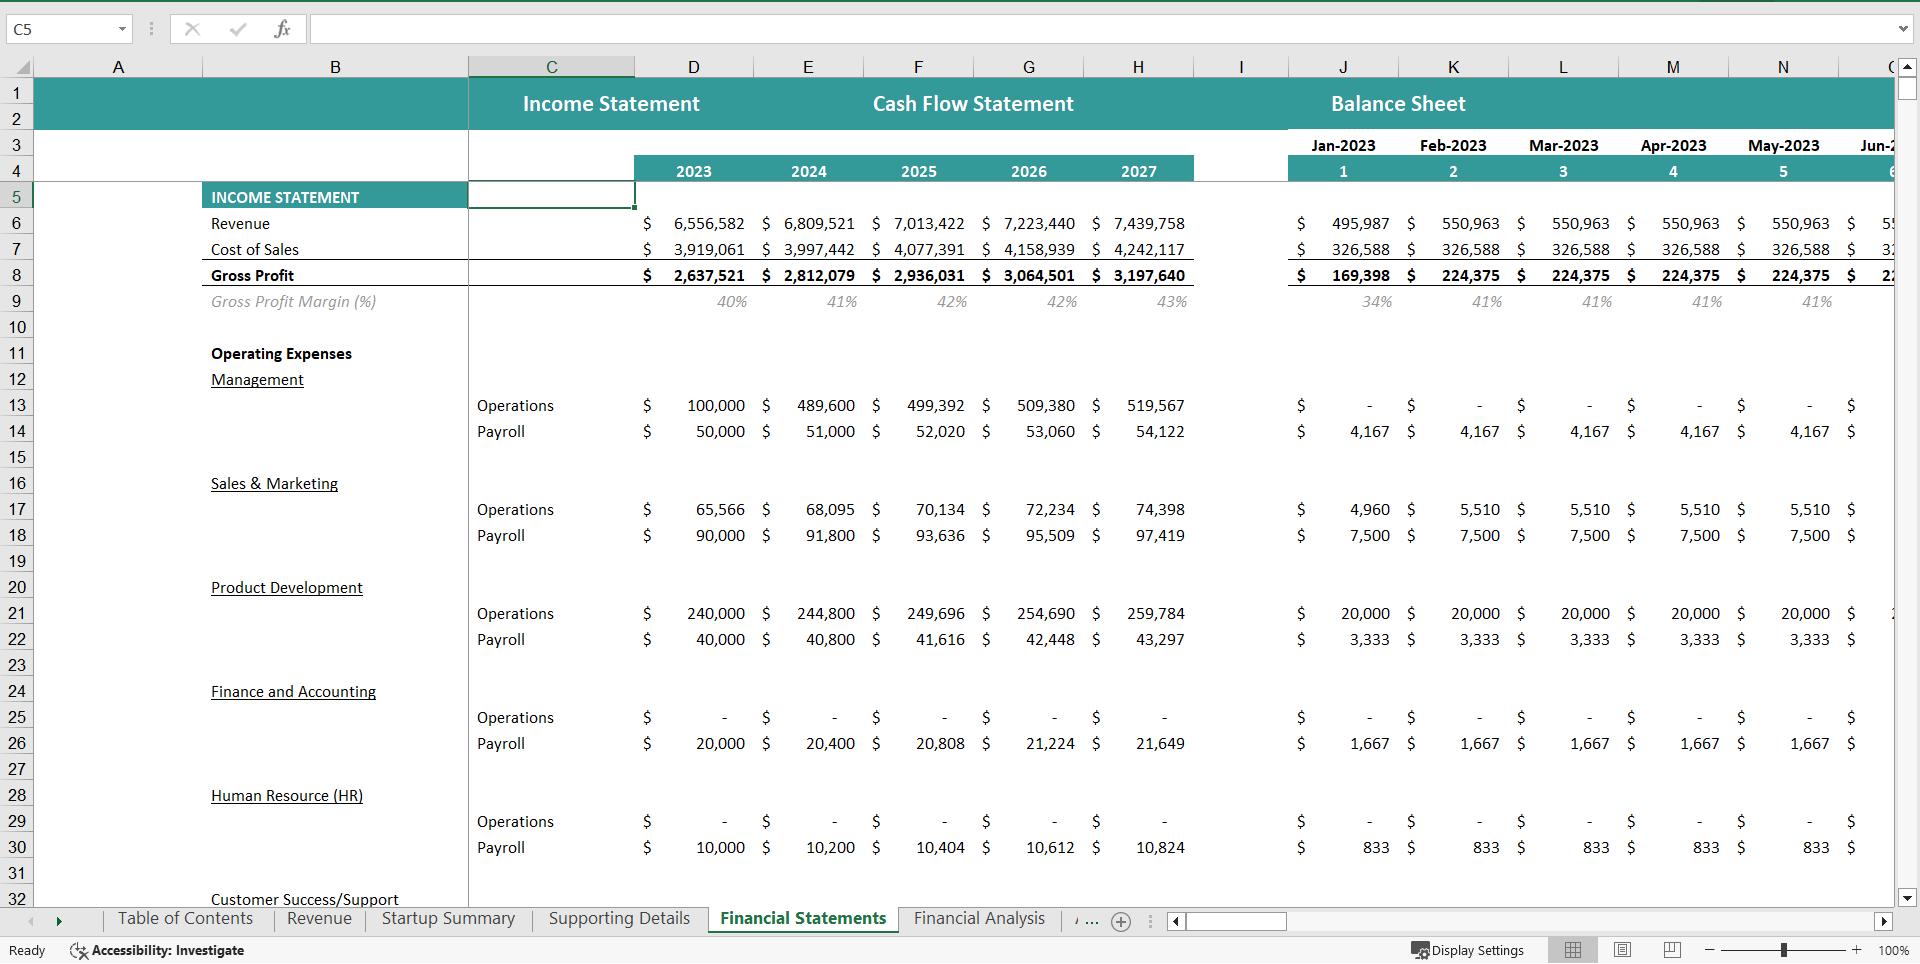 Rice Farming Financial Model Excel Projection Template (Excel template (XLSX)) Preview Image